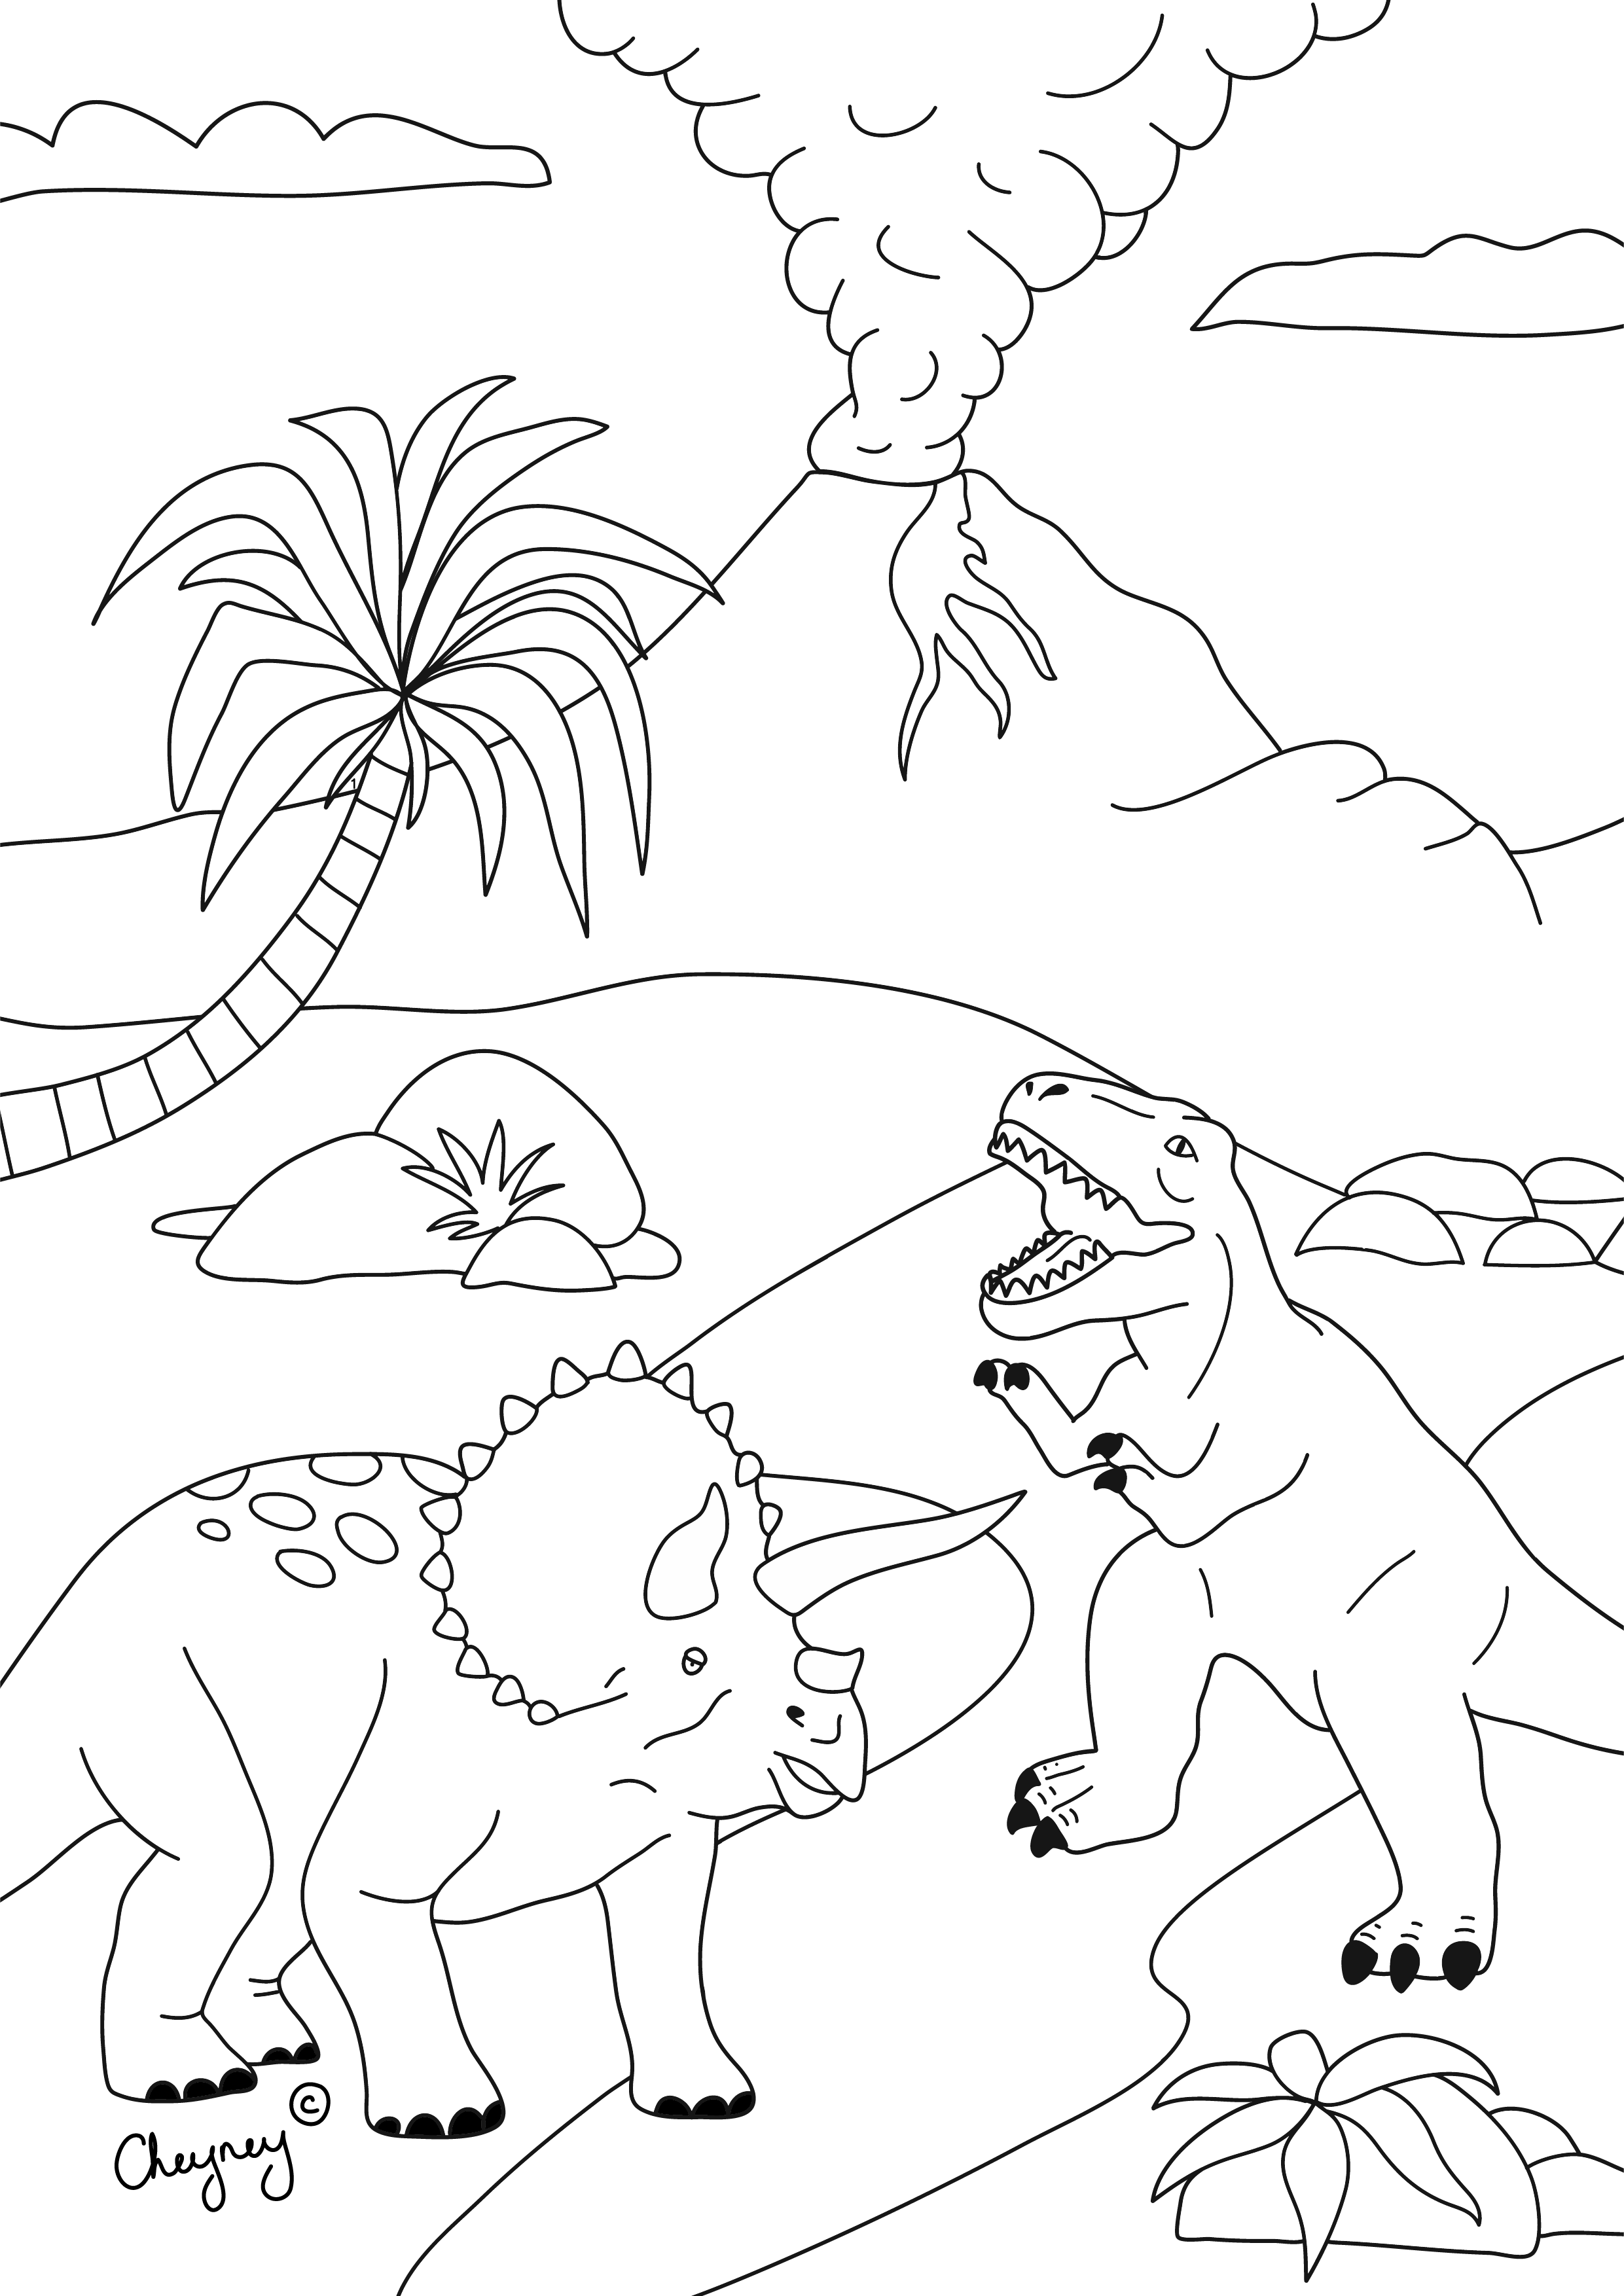 dinosaur colour by numbers or not creative colouring in activity free a4 printable design by cheyney